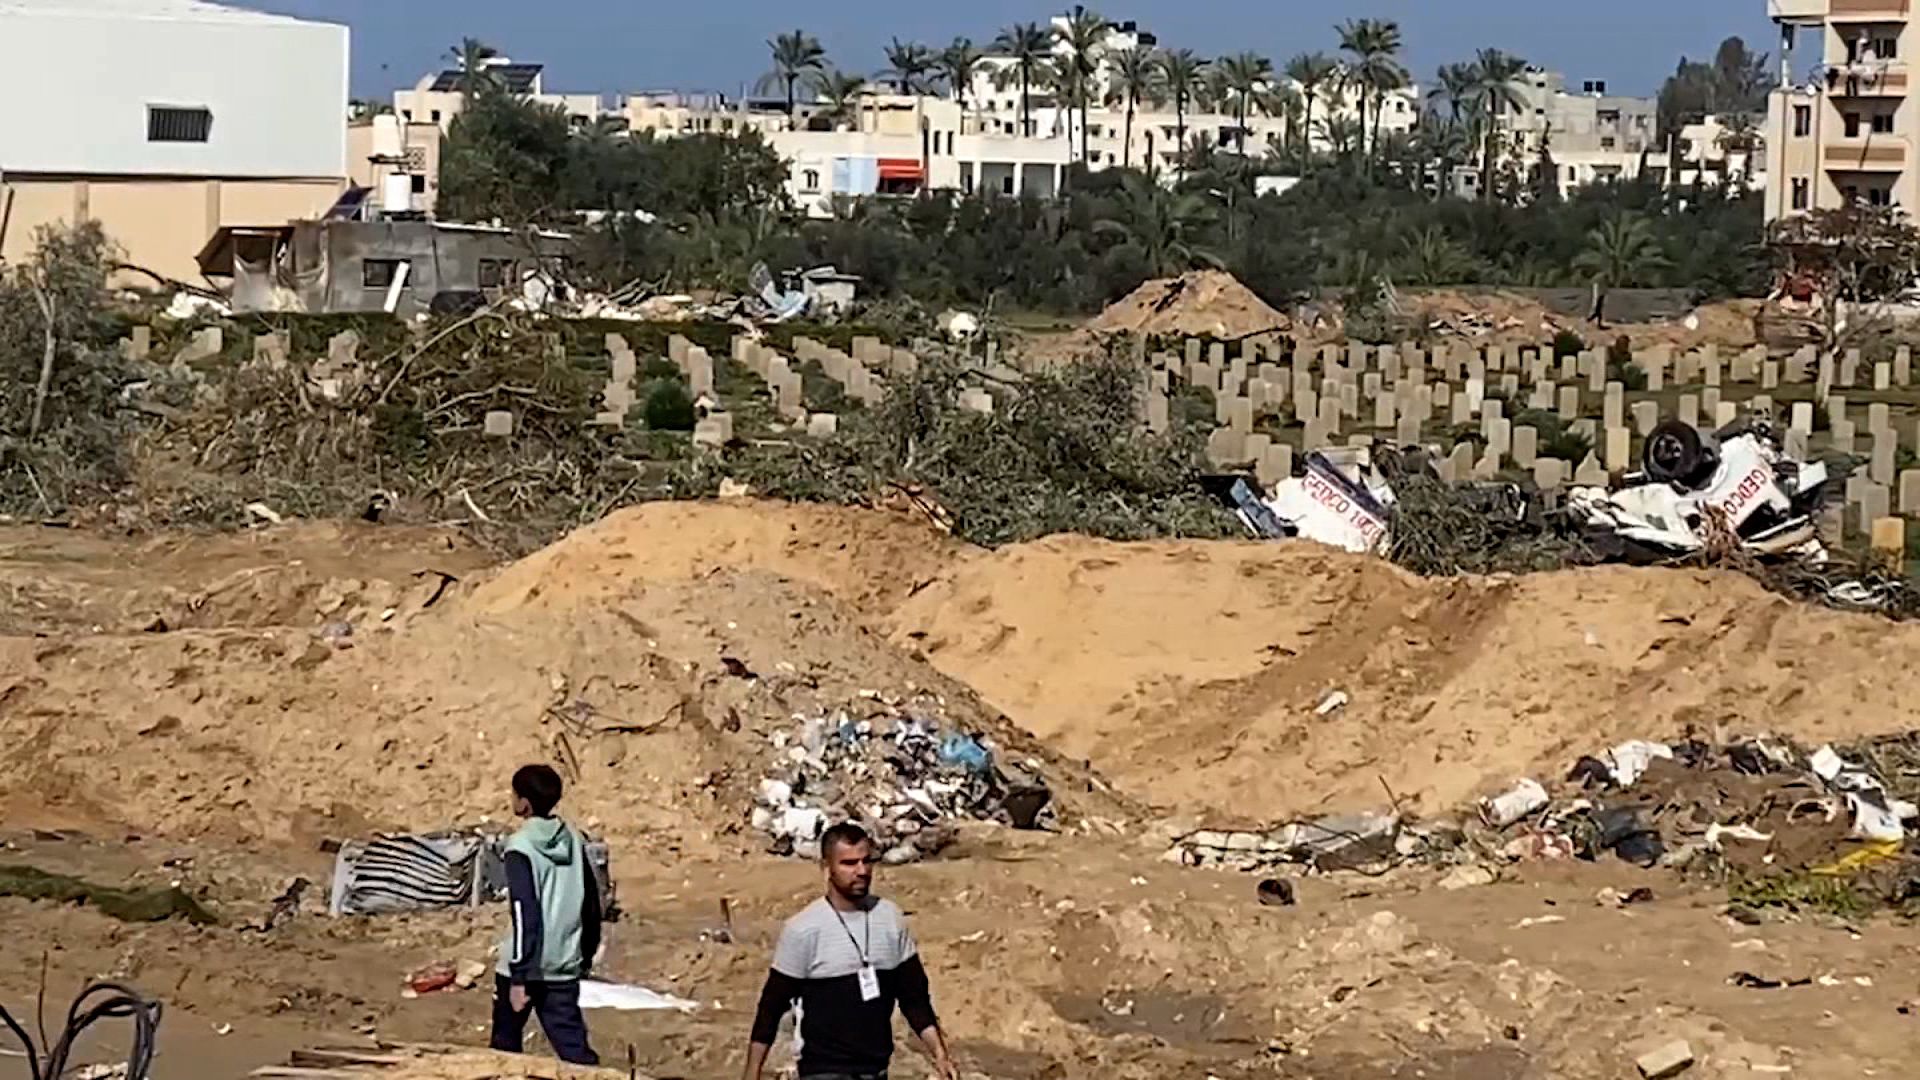 No peace for the dead: legal questions about Israel's destruction of  cemeteries in Gaza – EJIL: Talk!